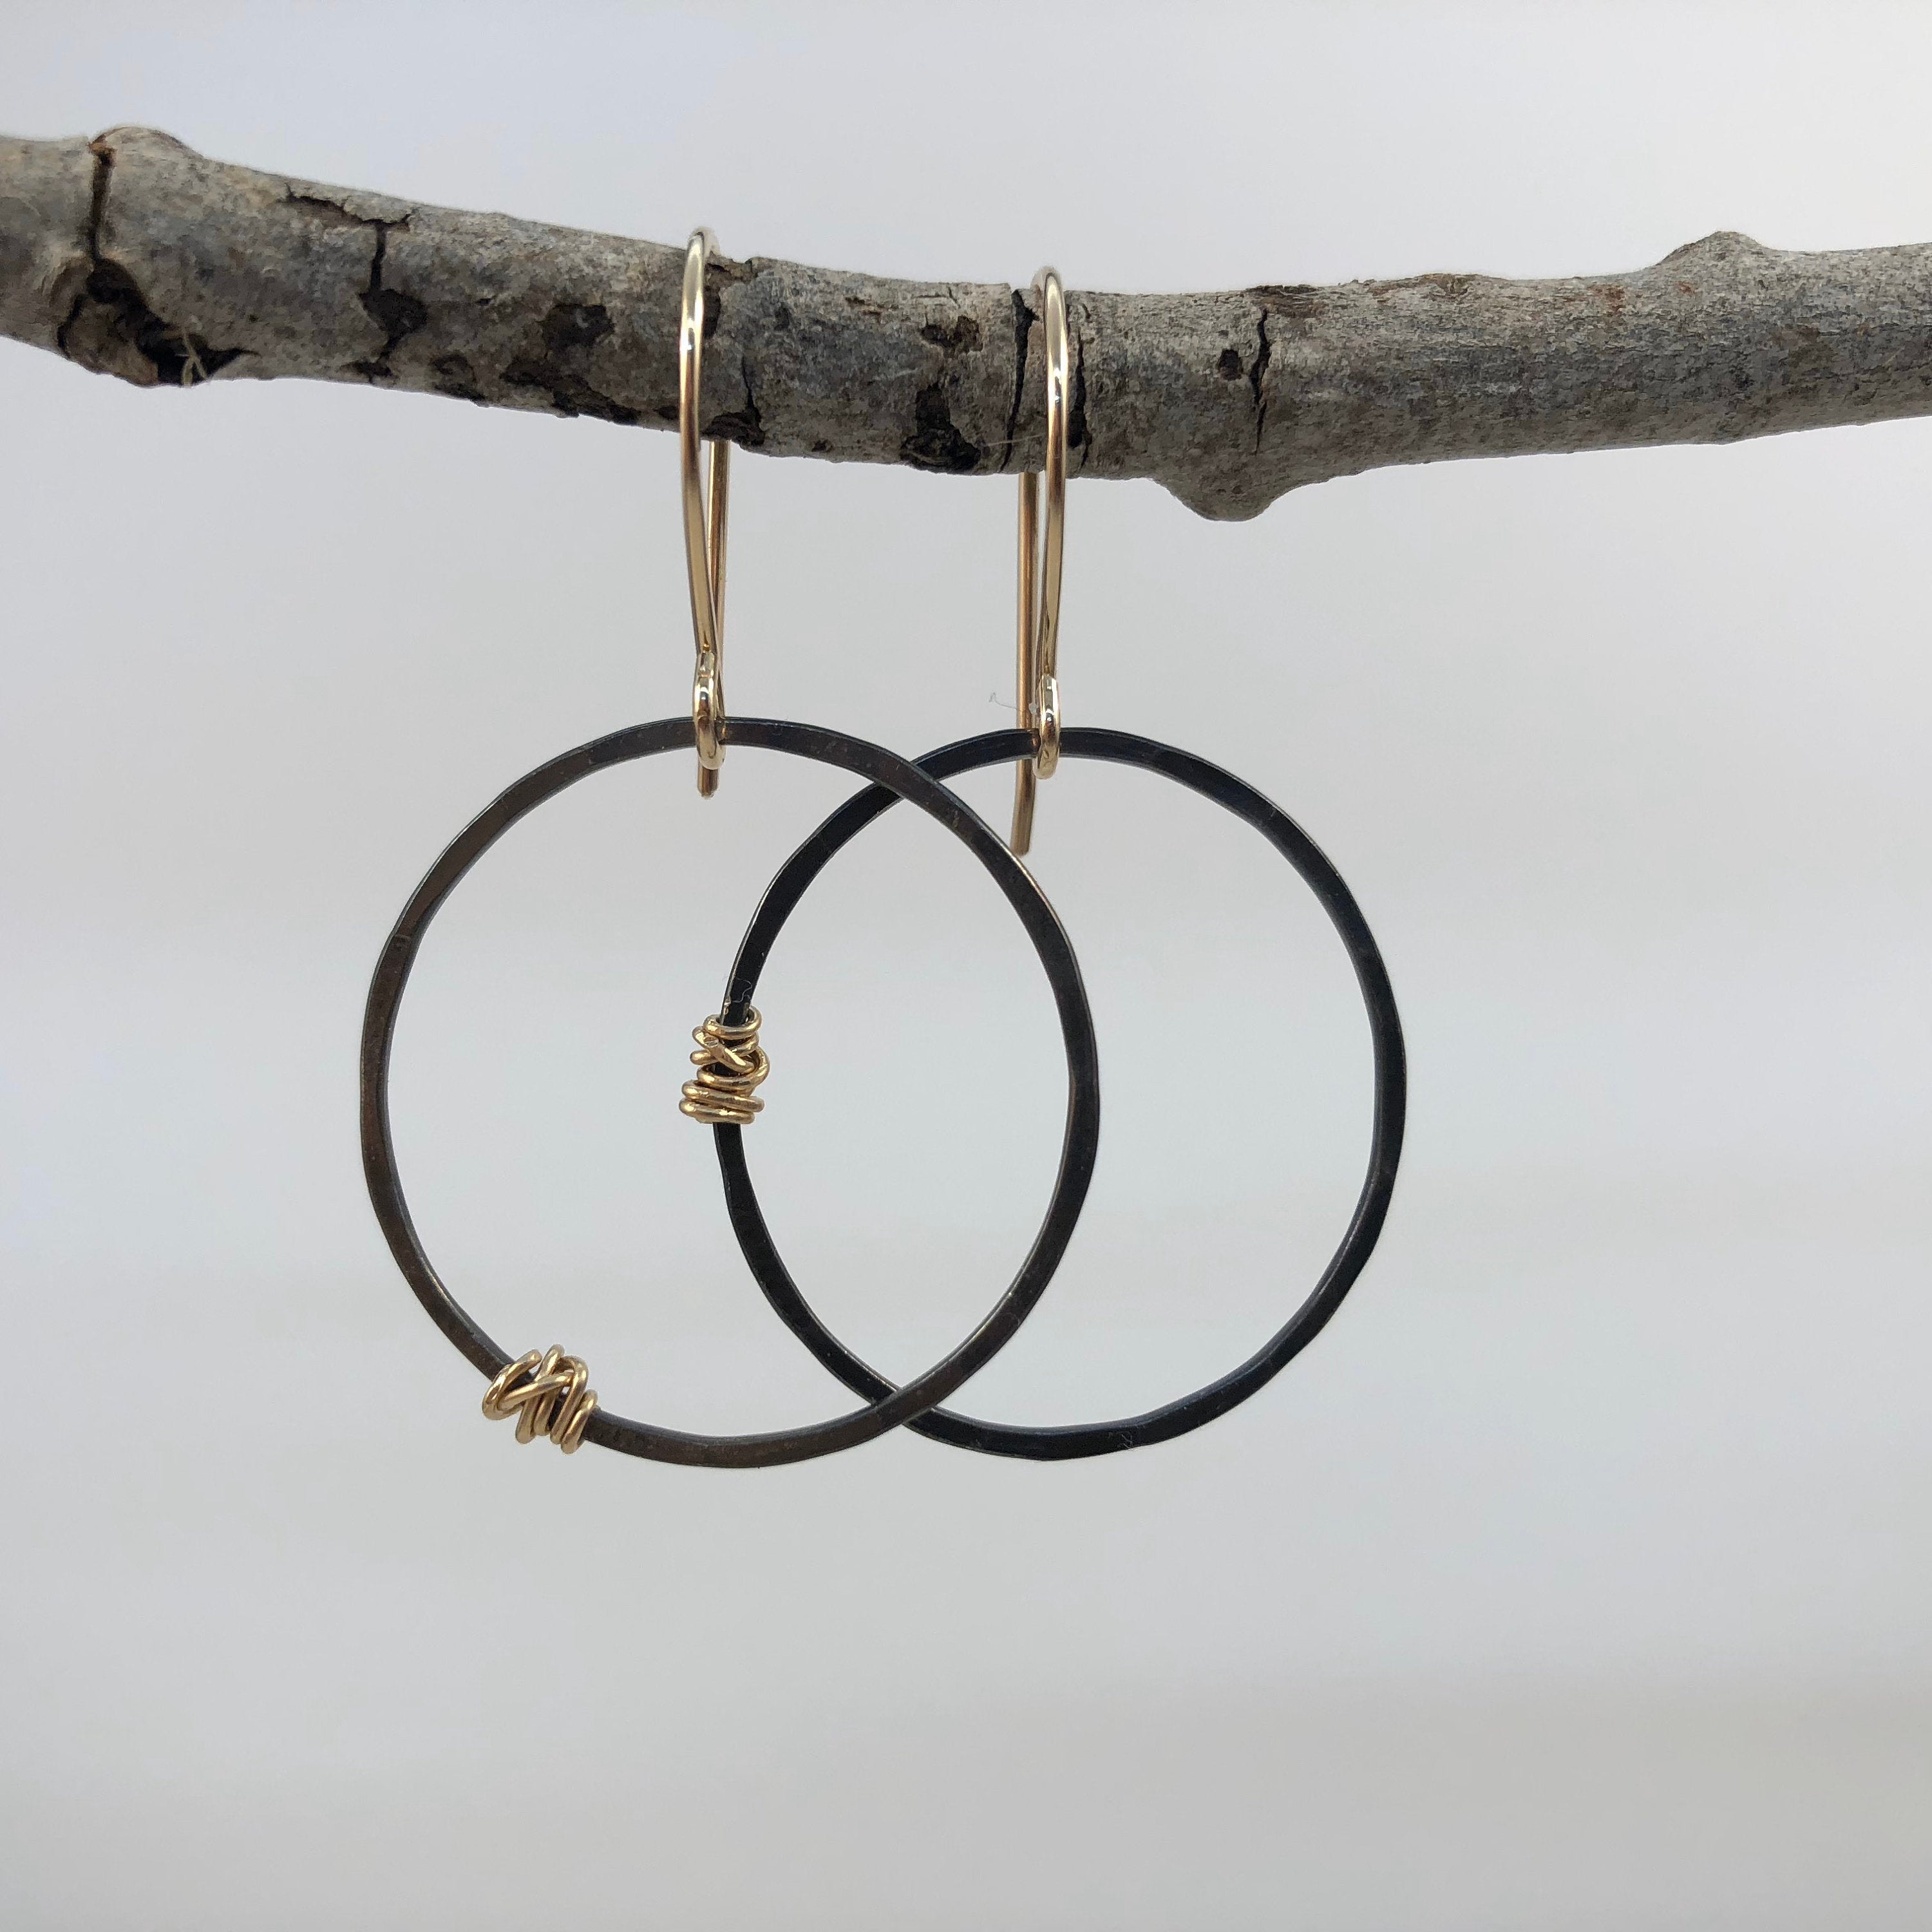 Oxidized Silver Hoops Earrings with Gold Wraps